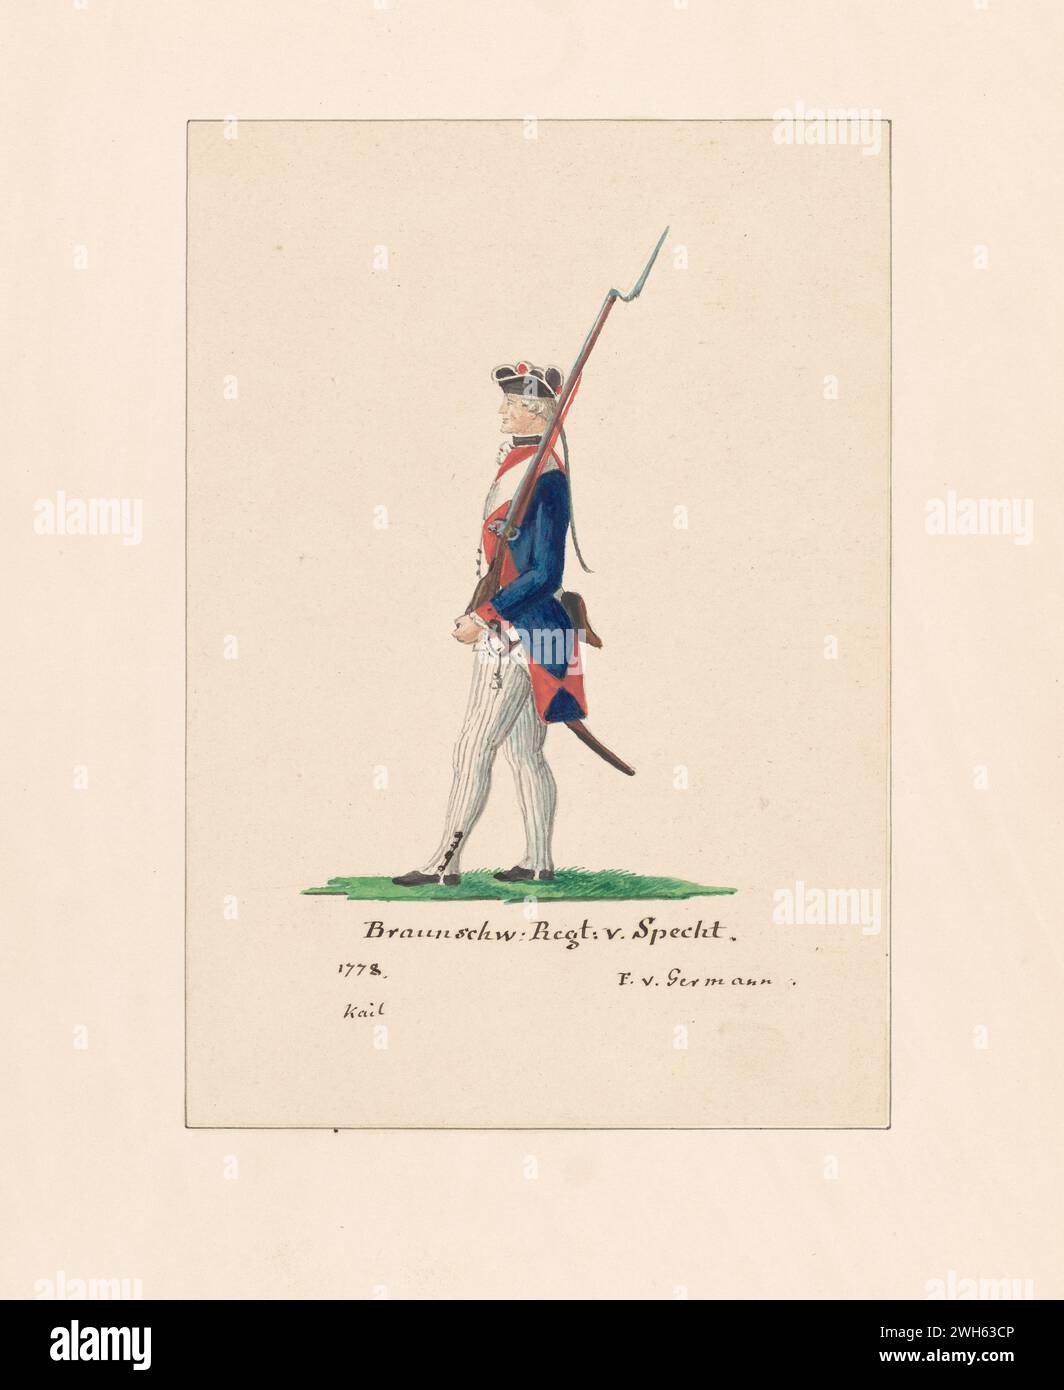 “Watercolor of a Soldier from the “Musketeer Regiment von Riedesel”  in the Brunswick (Braunschweig) Corps during the American Revolutionary War” circa 1778.    From a series of prints by Friedrich von German captain of a regiment from Hesse-Hanau, one of the many German auxiliary troops hired by George III to fight in the American Revolution. He arrived in North America in 1775 During the war, he painted a series of watercolors of American, British, and German soldiers. Stock Photo